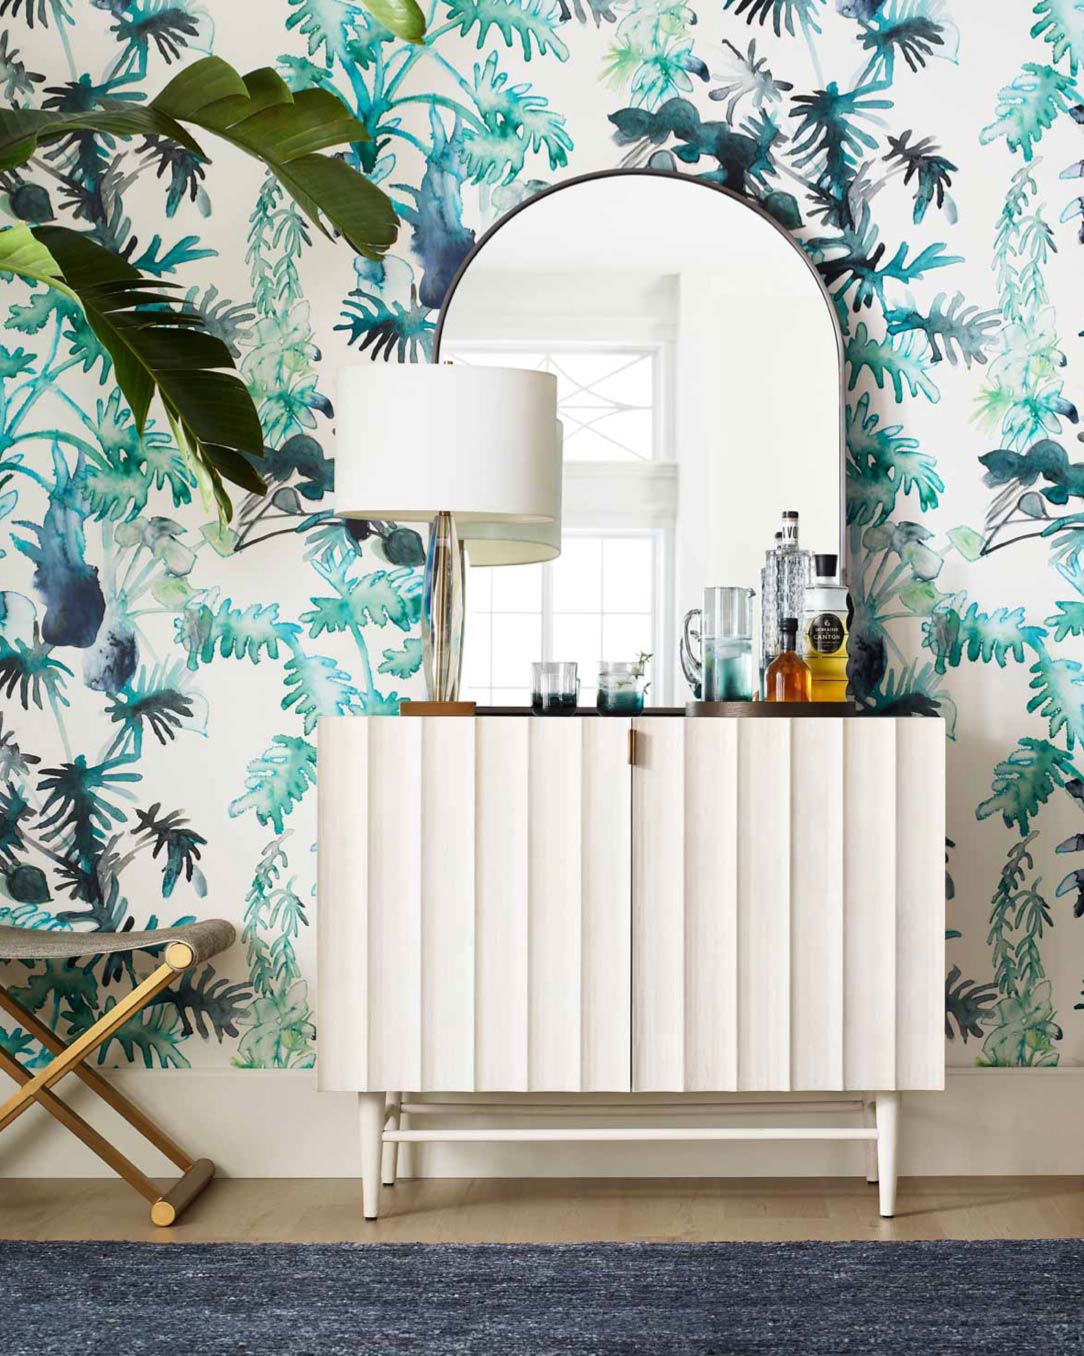 A living room with tropical wallpaper and mirror